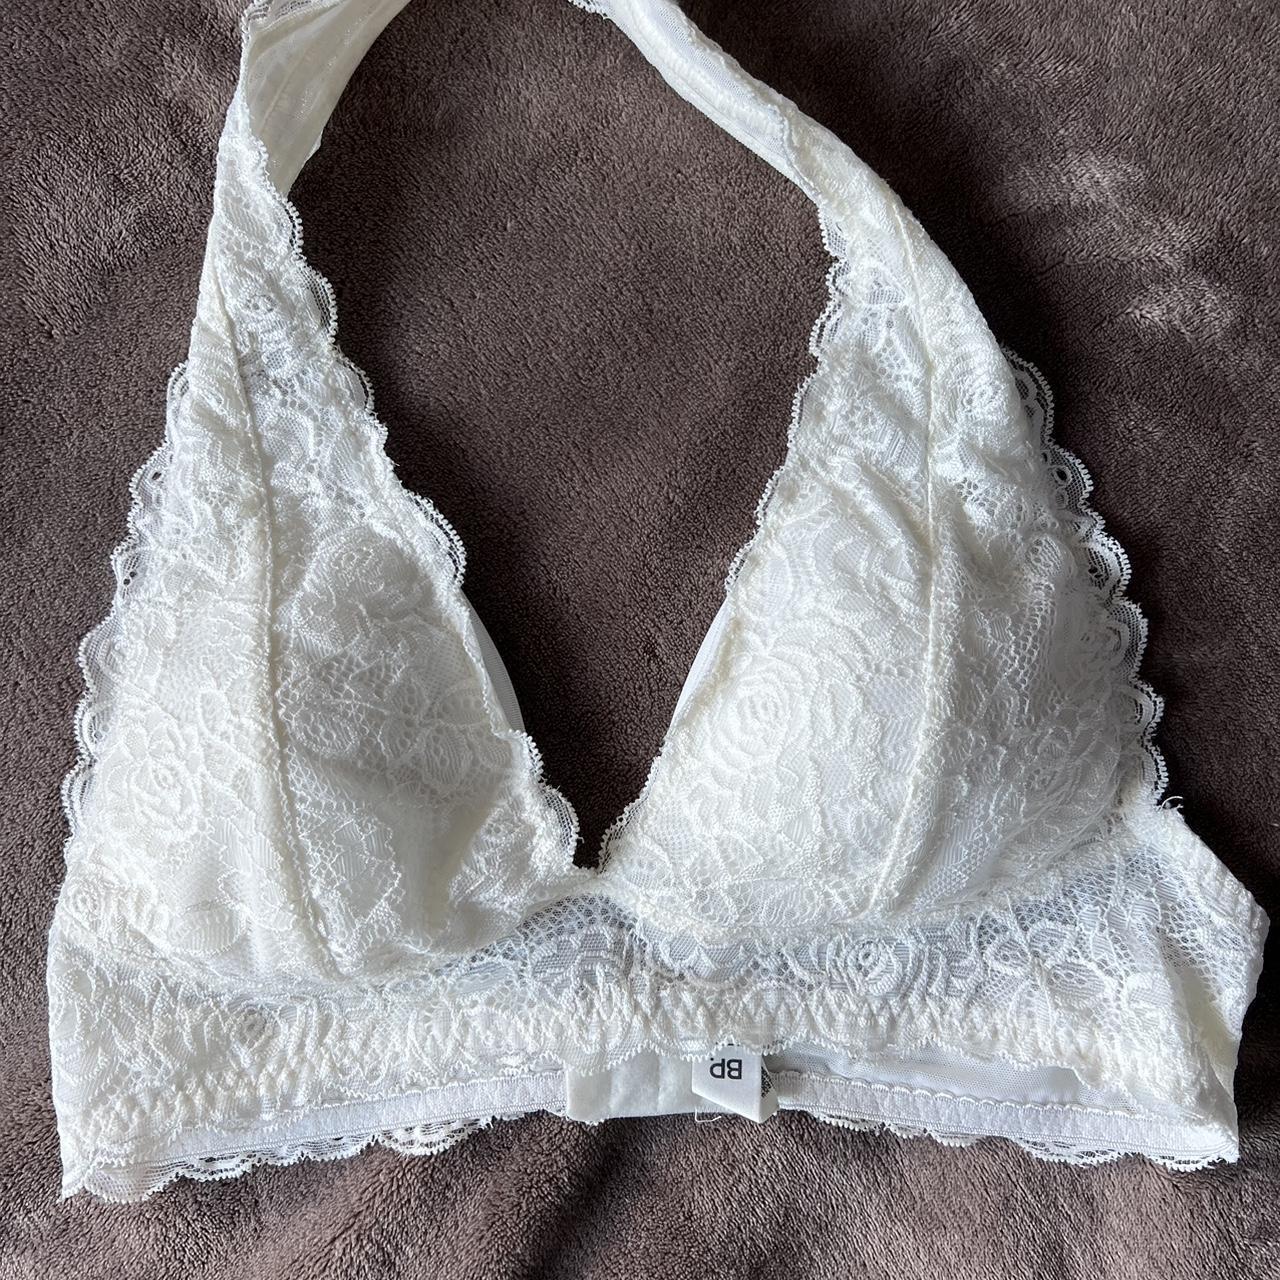 White bralette Bought from target Worn once - Depop